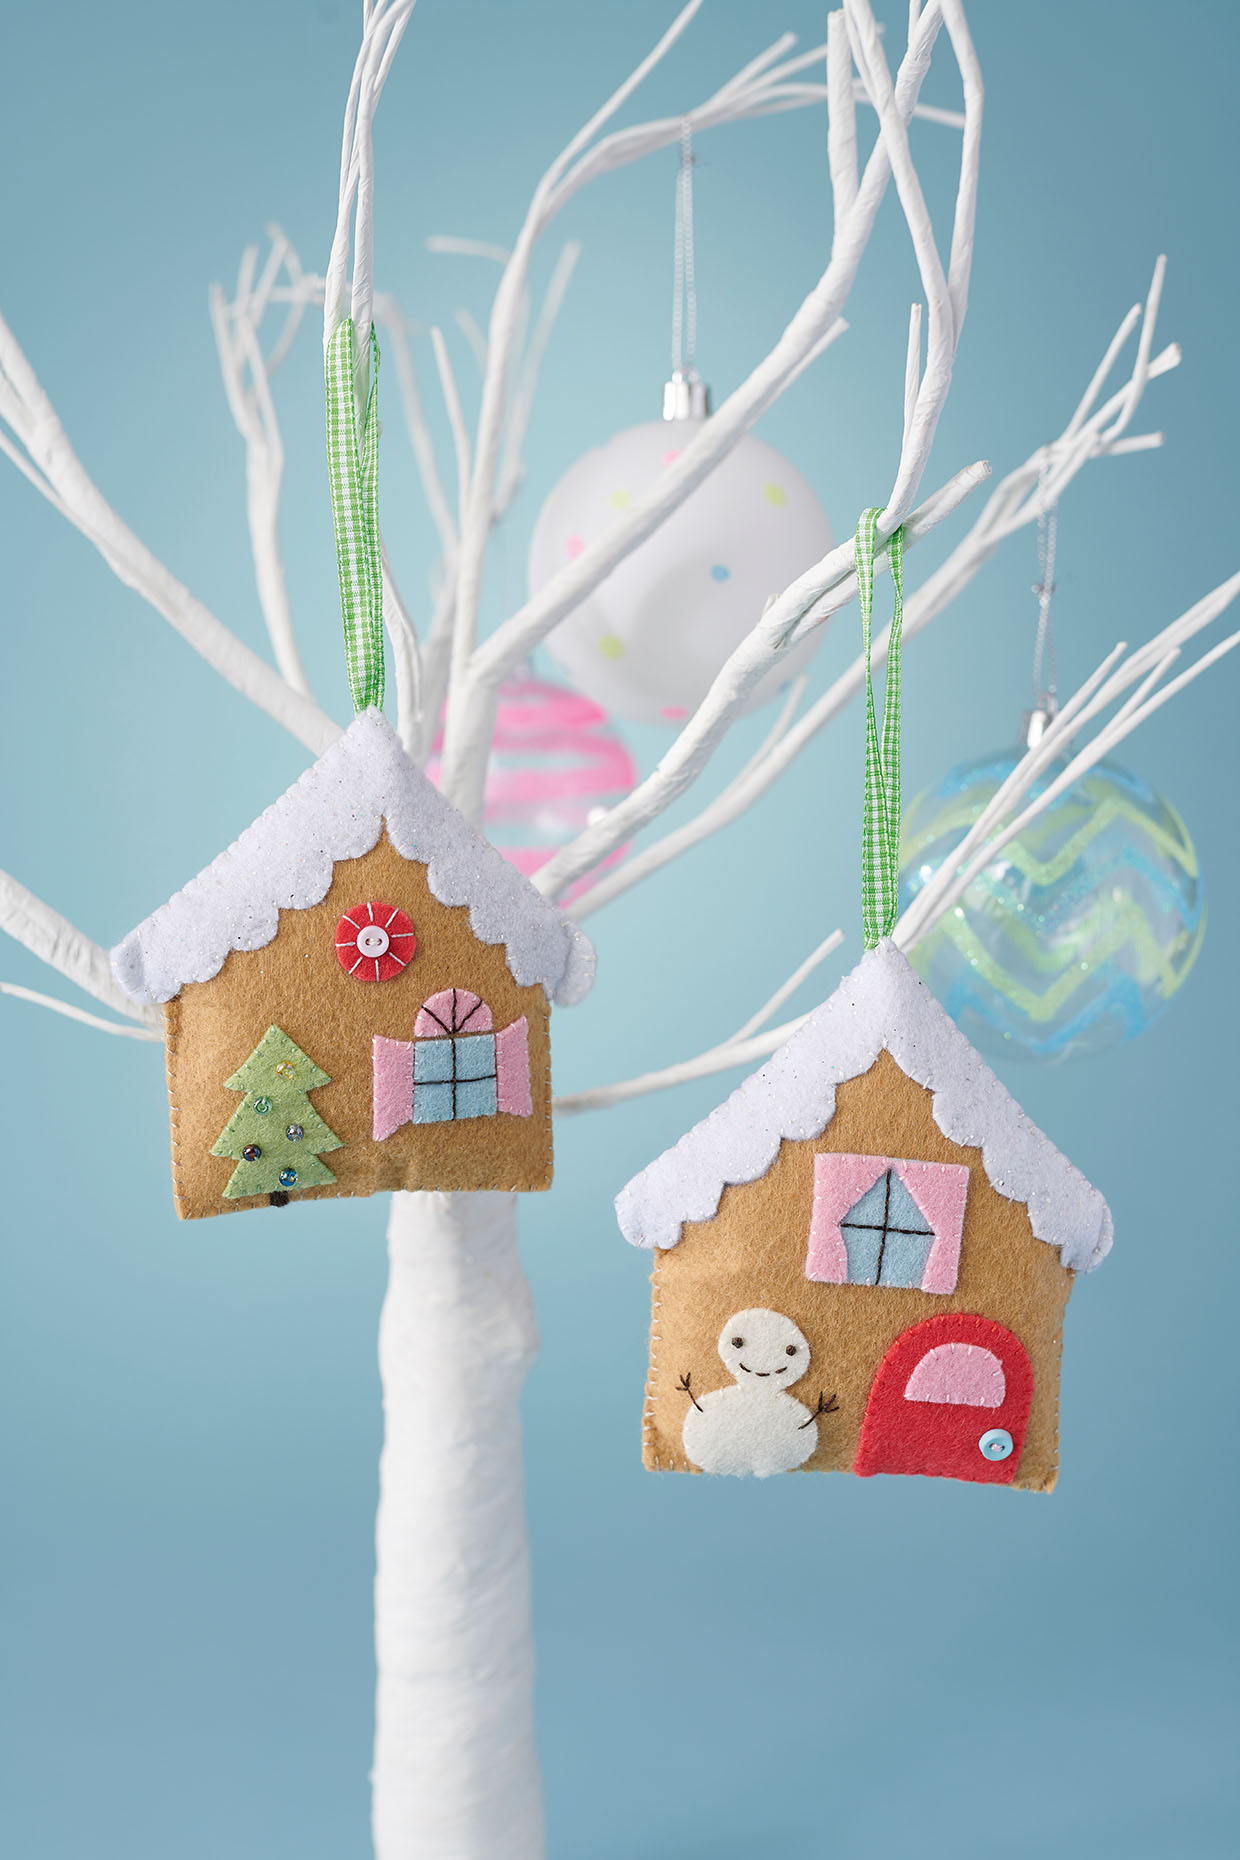 How to make gingerbread tree decorations